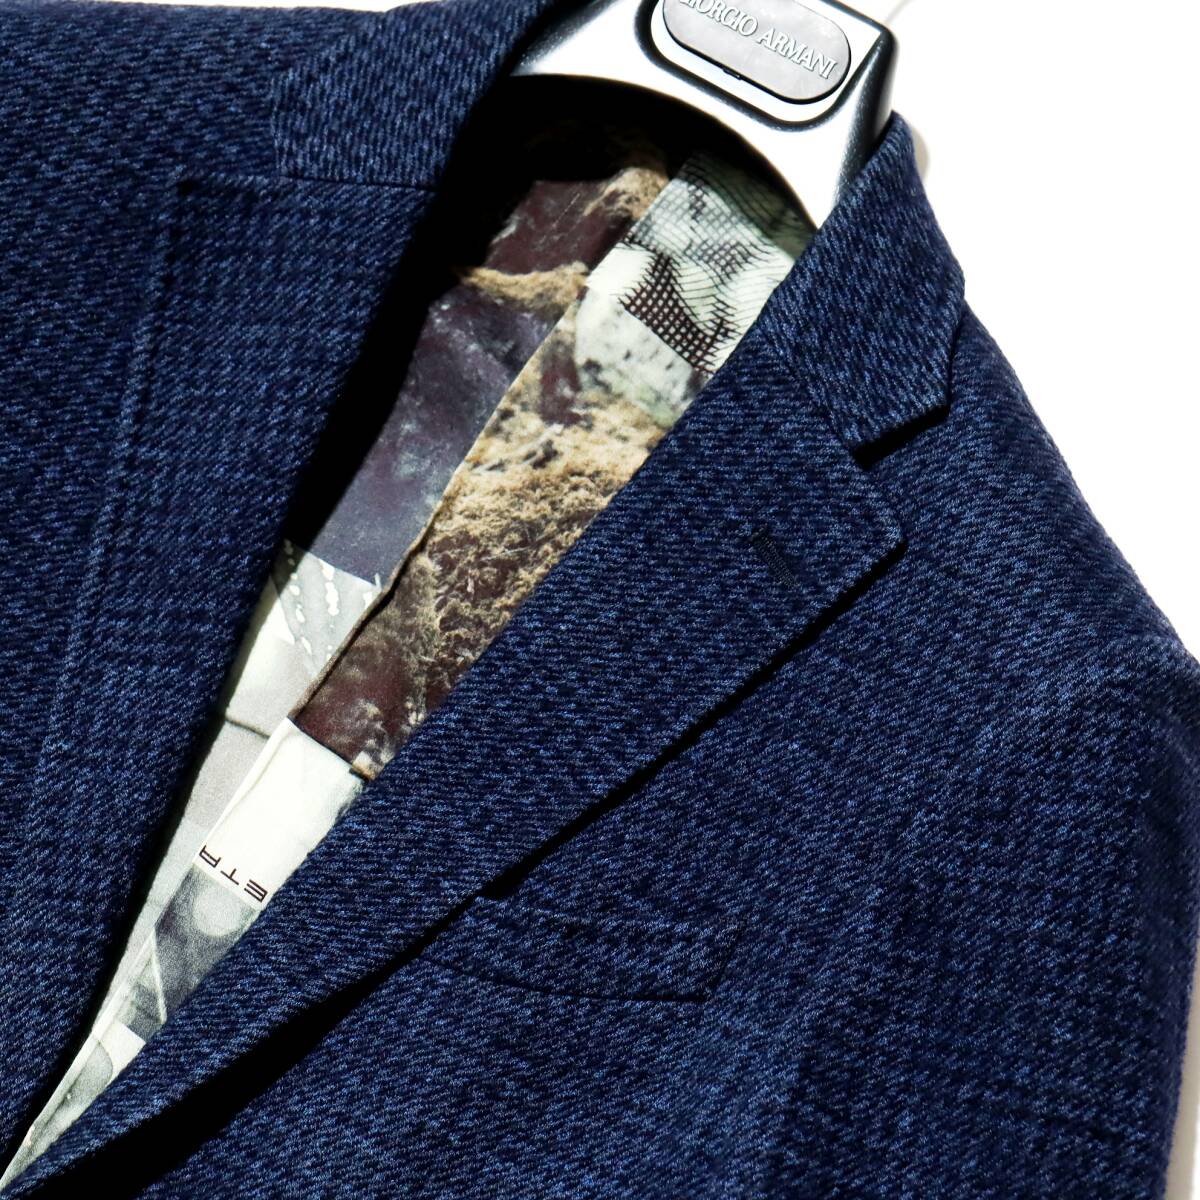  illusion. excellent article!!! top class 28 ten thousand [ETRO/ Etro ]SUPERREGGEAR NEW JERSEY* Ricci . capital .. finest quality jersey - material * through year finest quality navy jacket 44 S